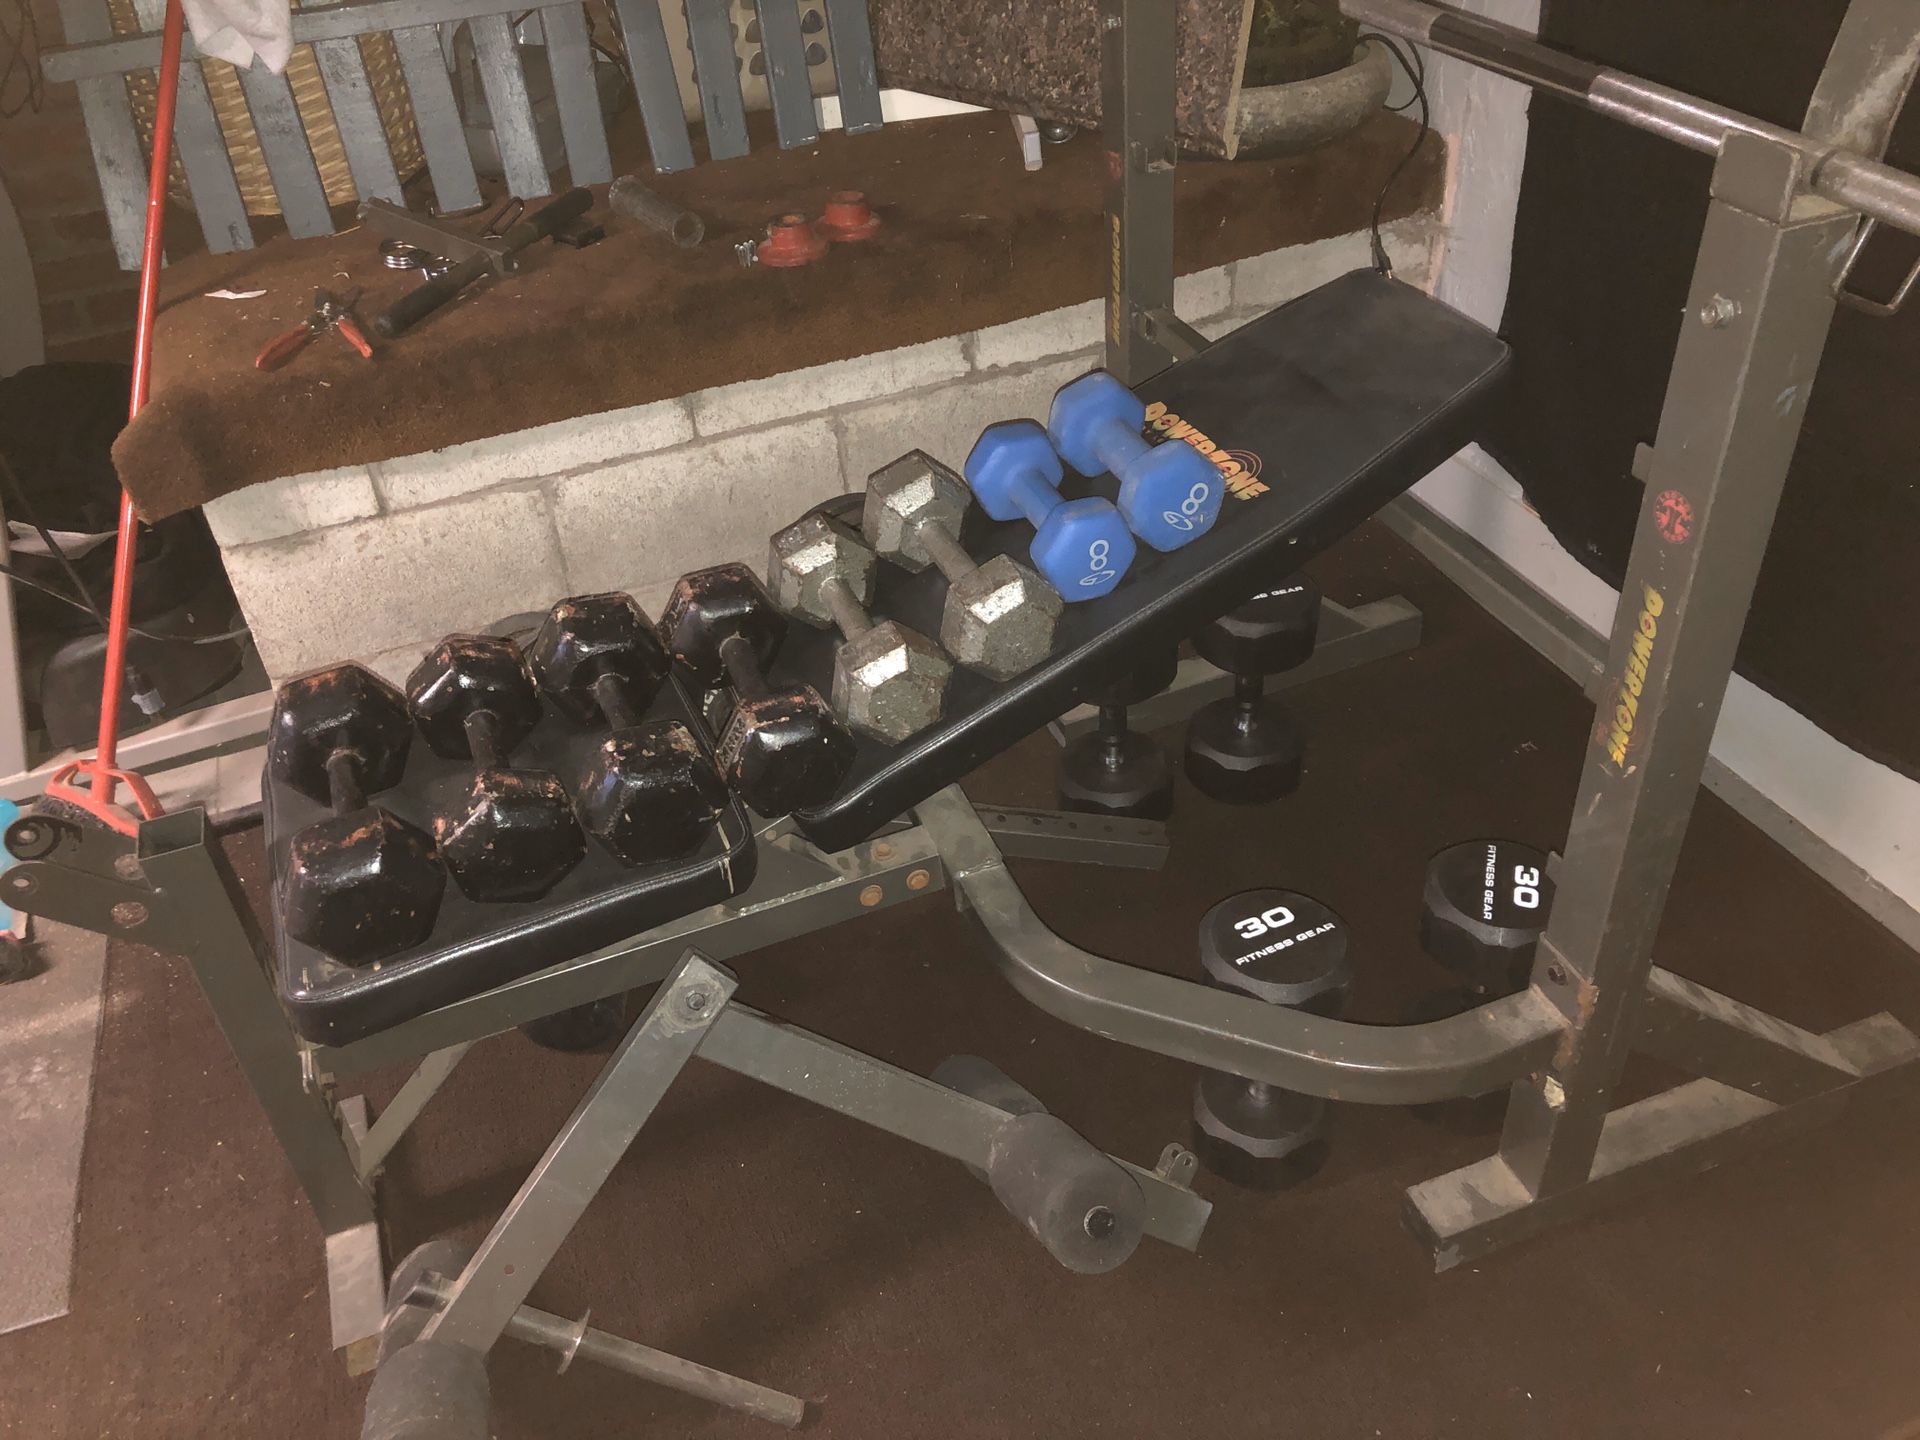 Weight bench with all weights plus lots of dumbbells.